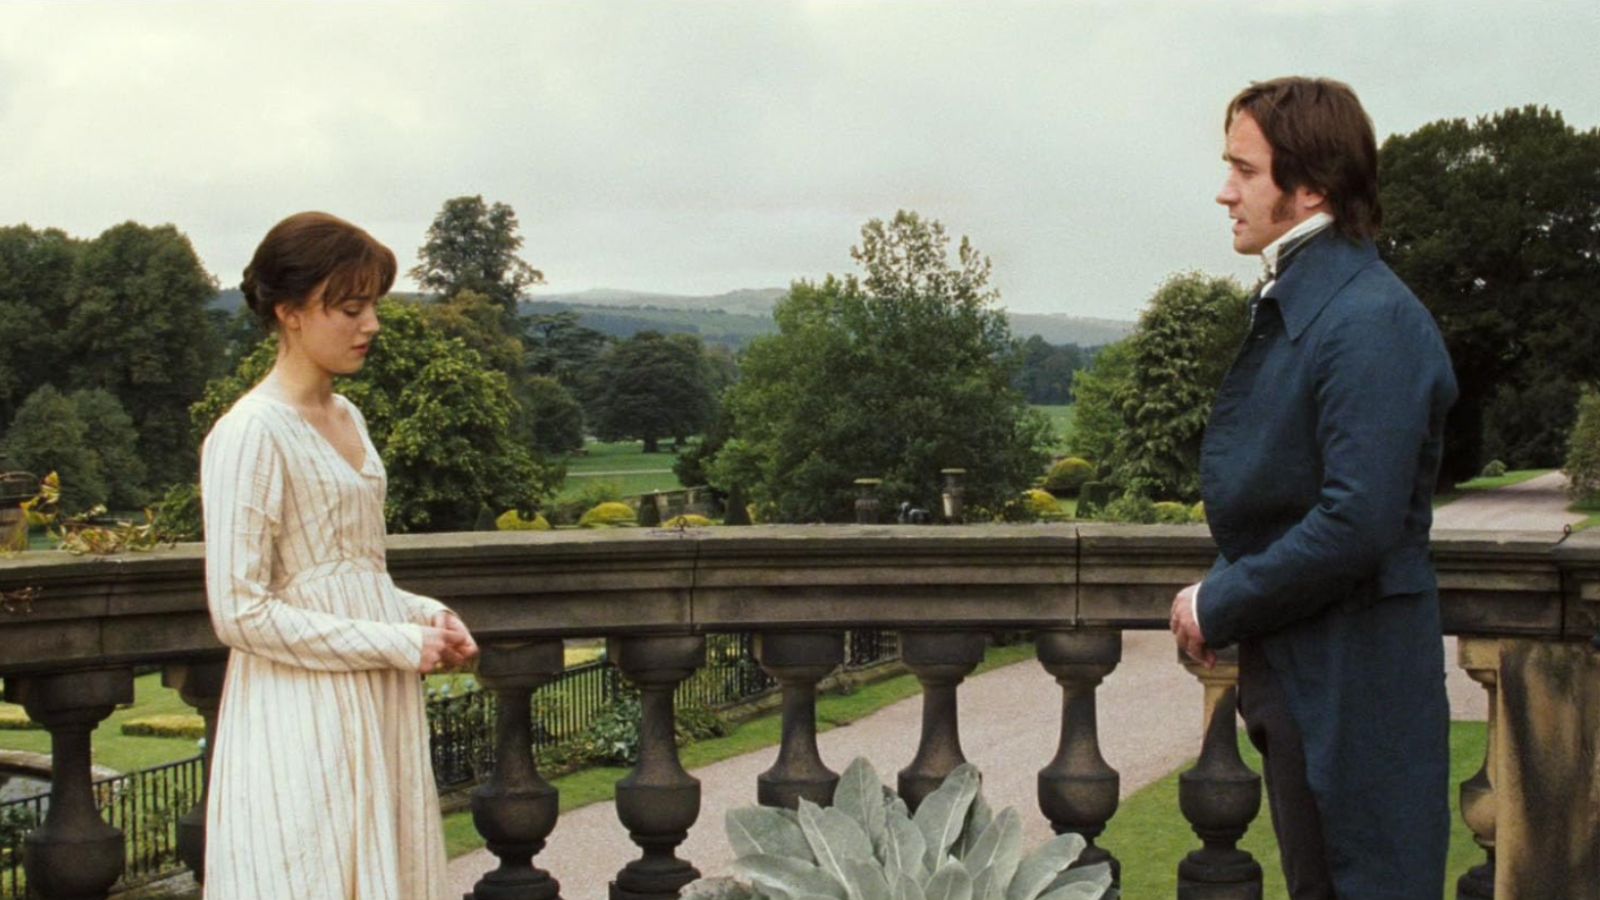 <p><span> The timeless dance of misunderstandings and romance from Jane Austen’s novel was exquisitely brought to life on screen. Keira Knightley and Matthew Macfadyen’s palpable chemistry made the rainy proposal scene unforgettable. With every glance and every dialogue, the complex emotions of the era’s romance shined brighter than ever.</span></p>